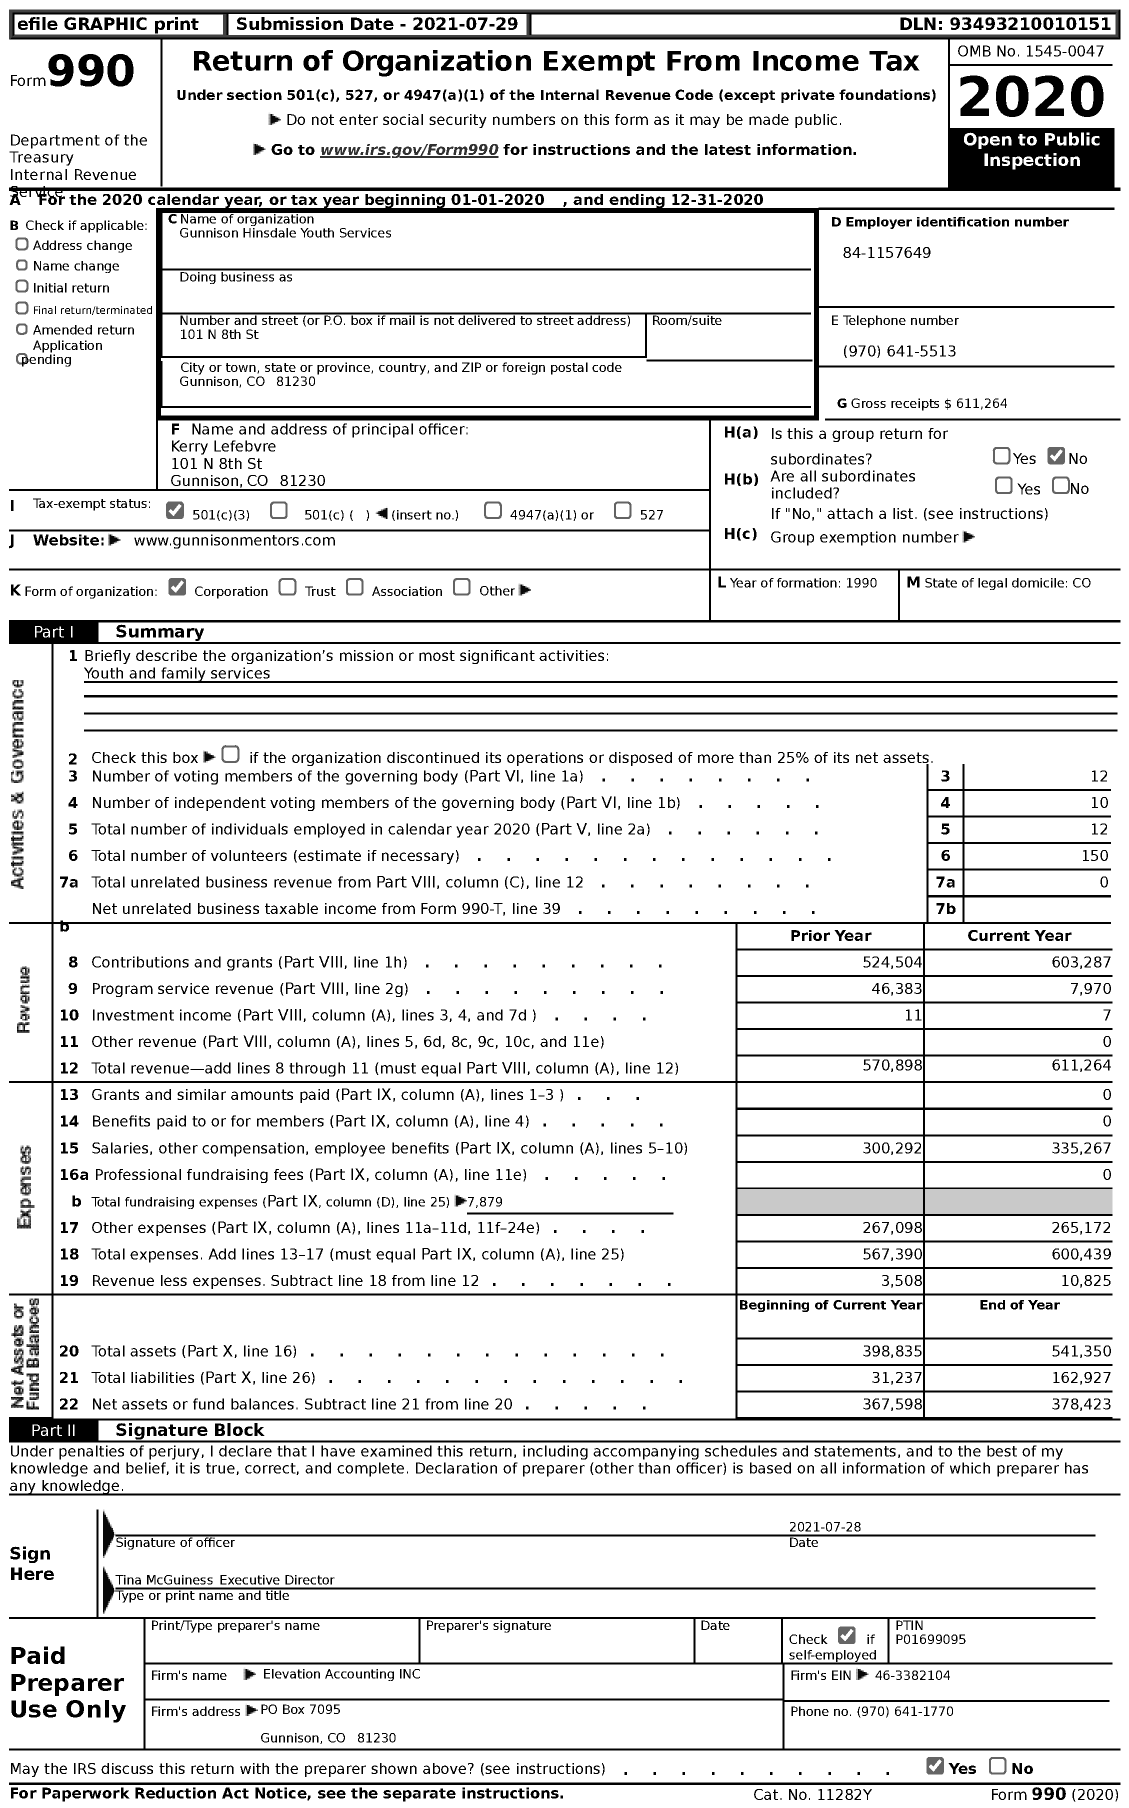 Image of first page of 2020 Form 990 for Gunnison Hinsdale Youth Services